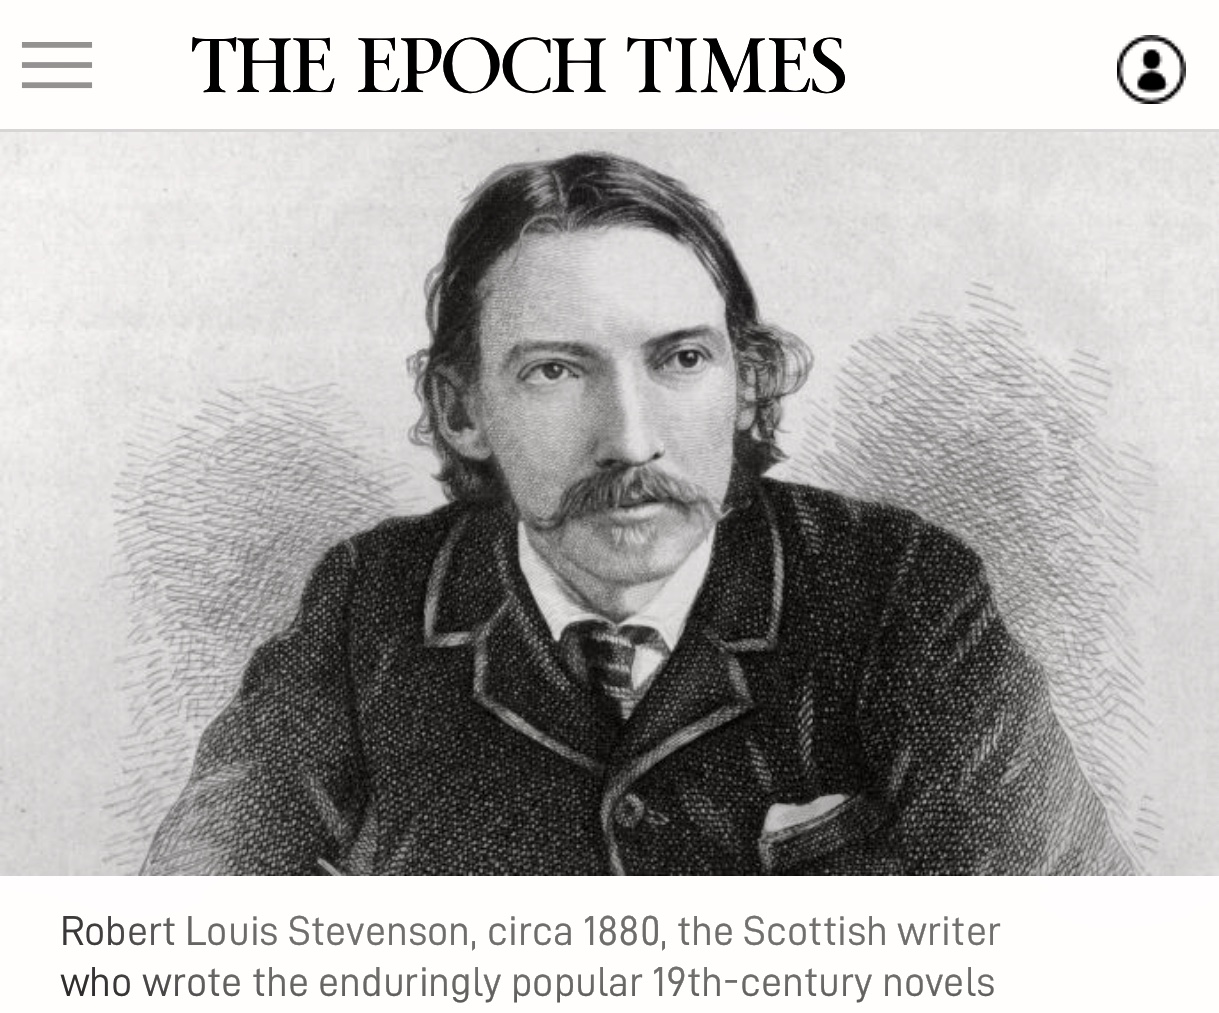 Why Poetry is Historically Important ? Robert Louis Stevenson’s ‘Requiem’: A Kind of Homecoming